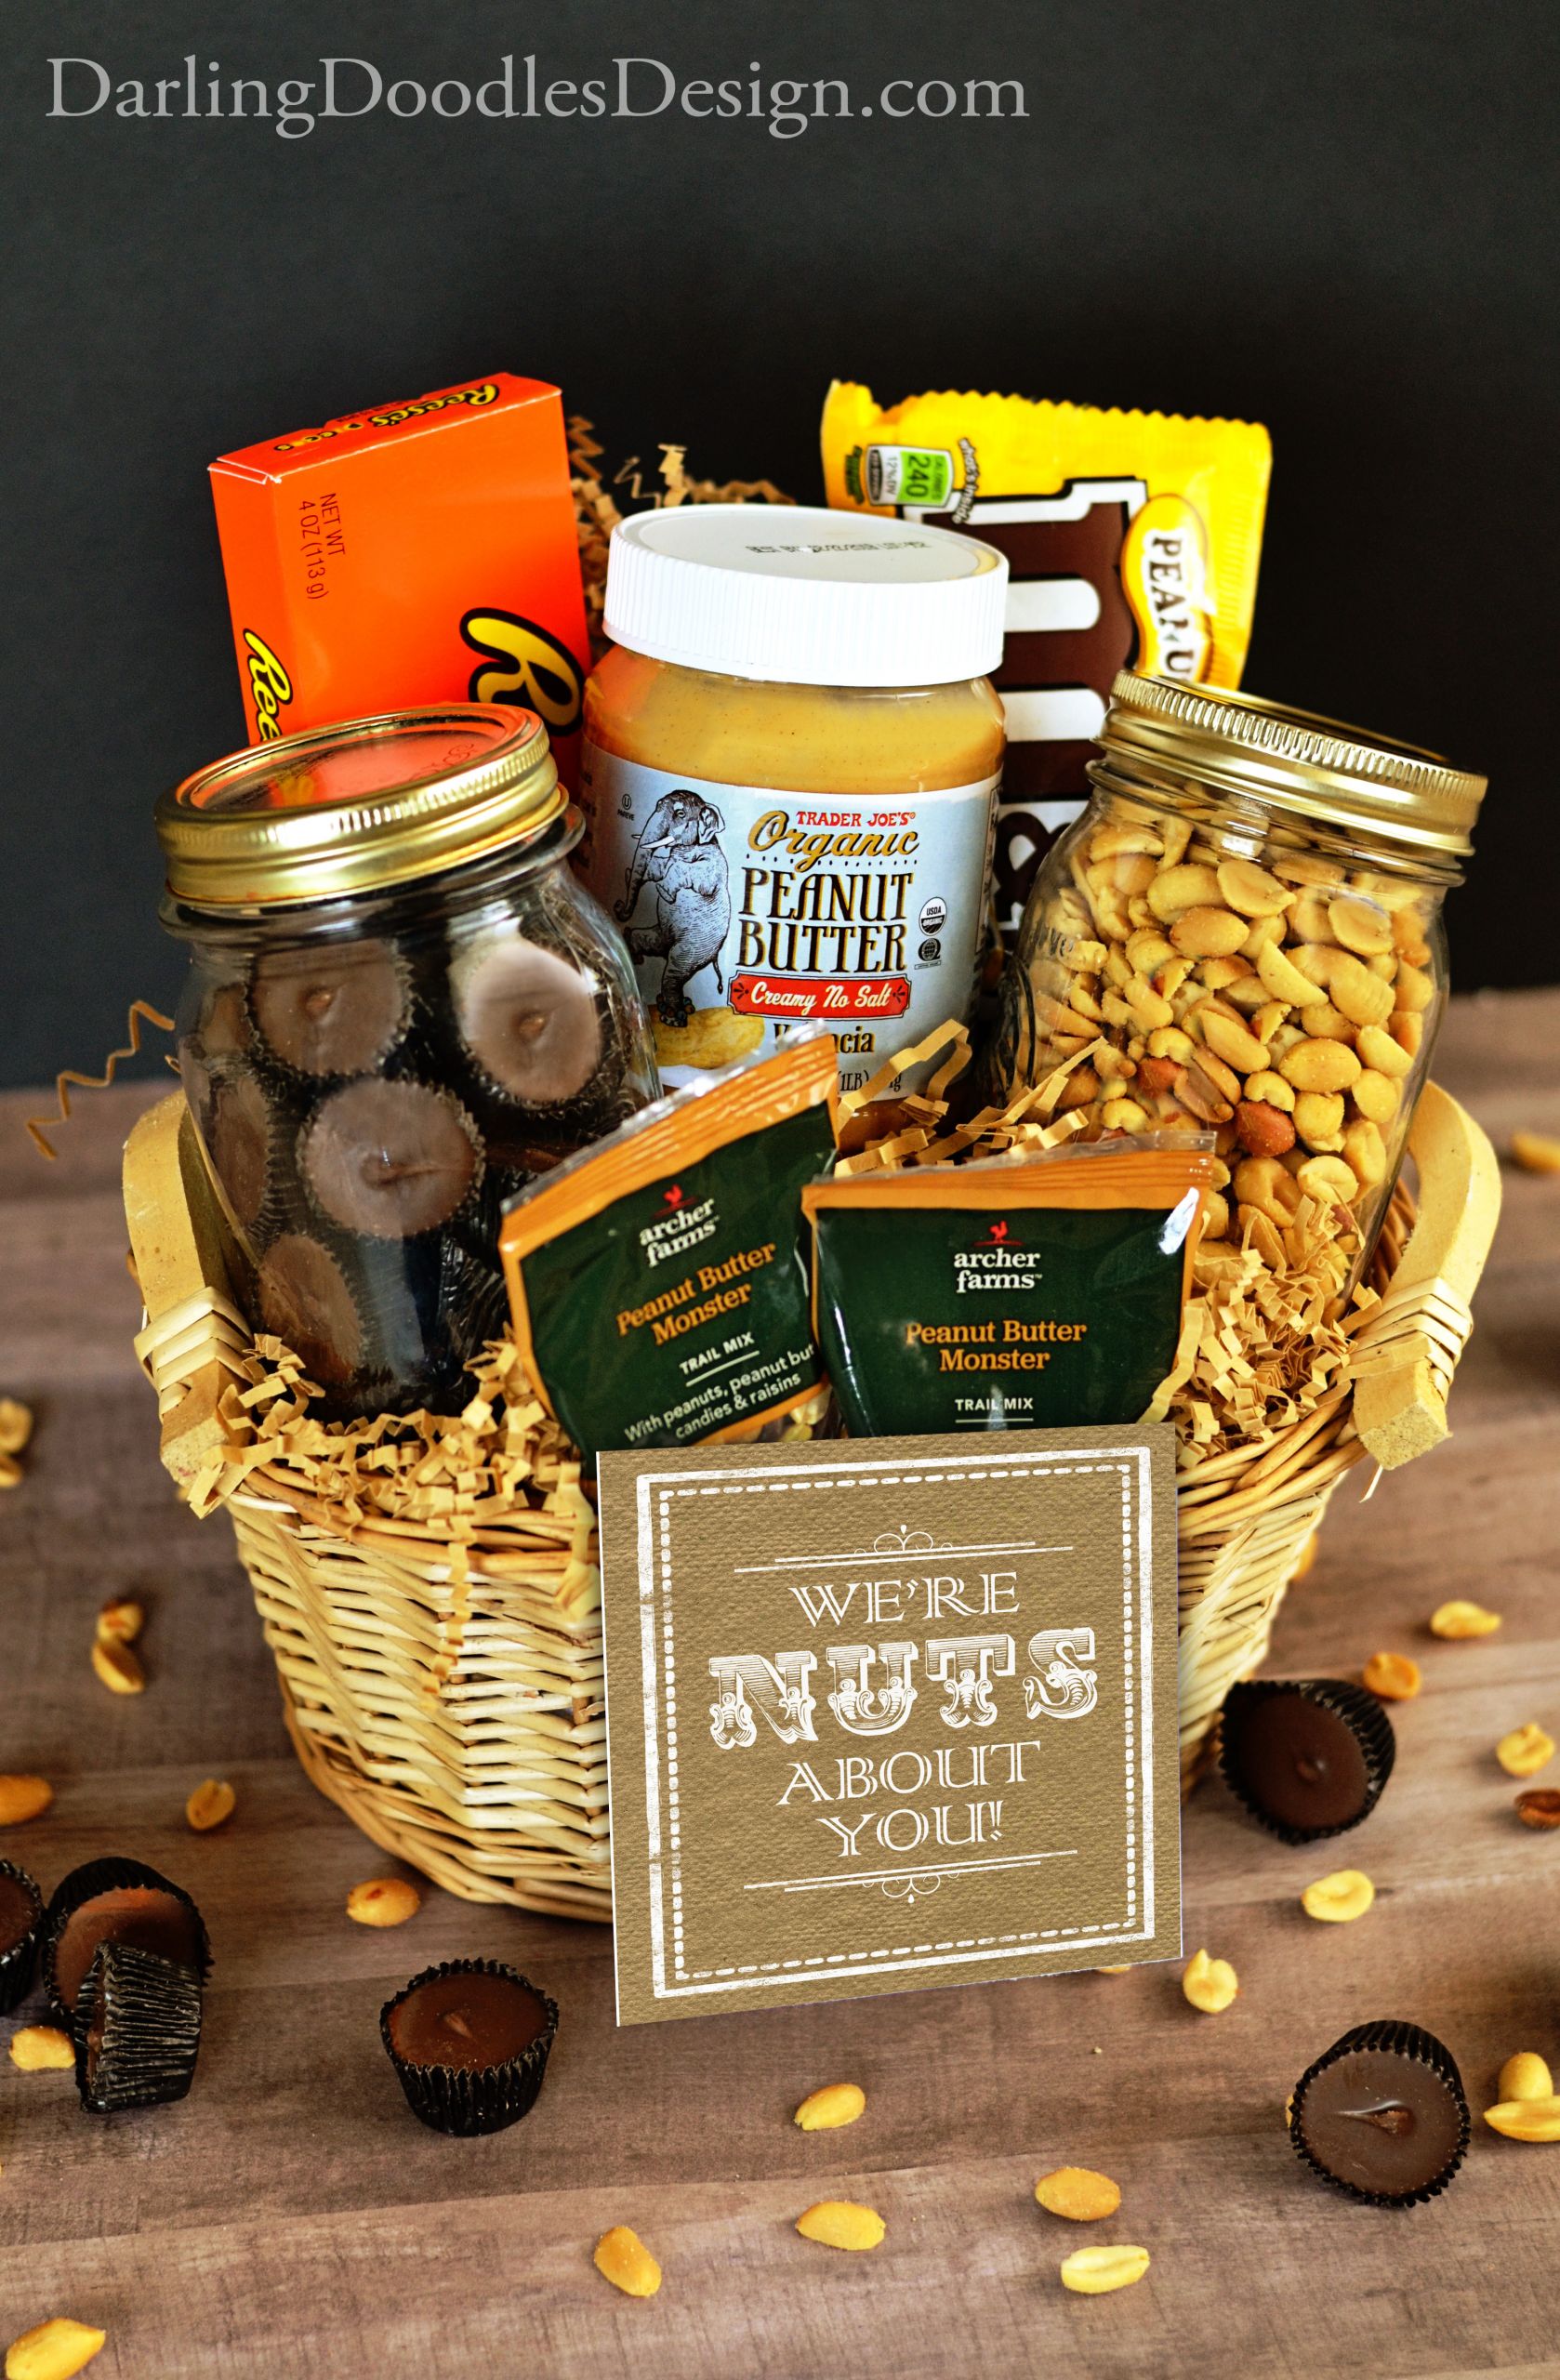 Father'S Day Gift Basket Ideas
 Nuts About You Father s Day Gift Basket Darling Doodles